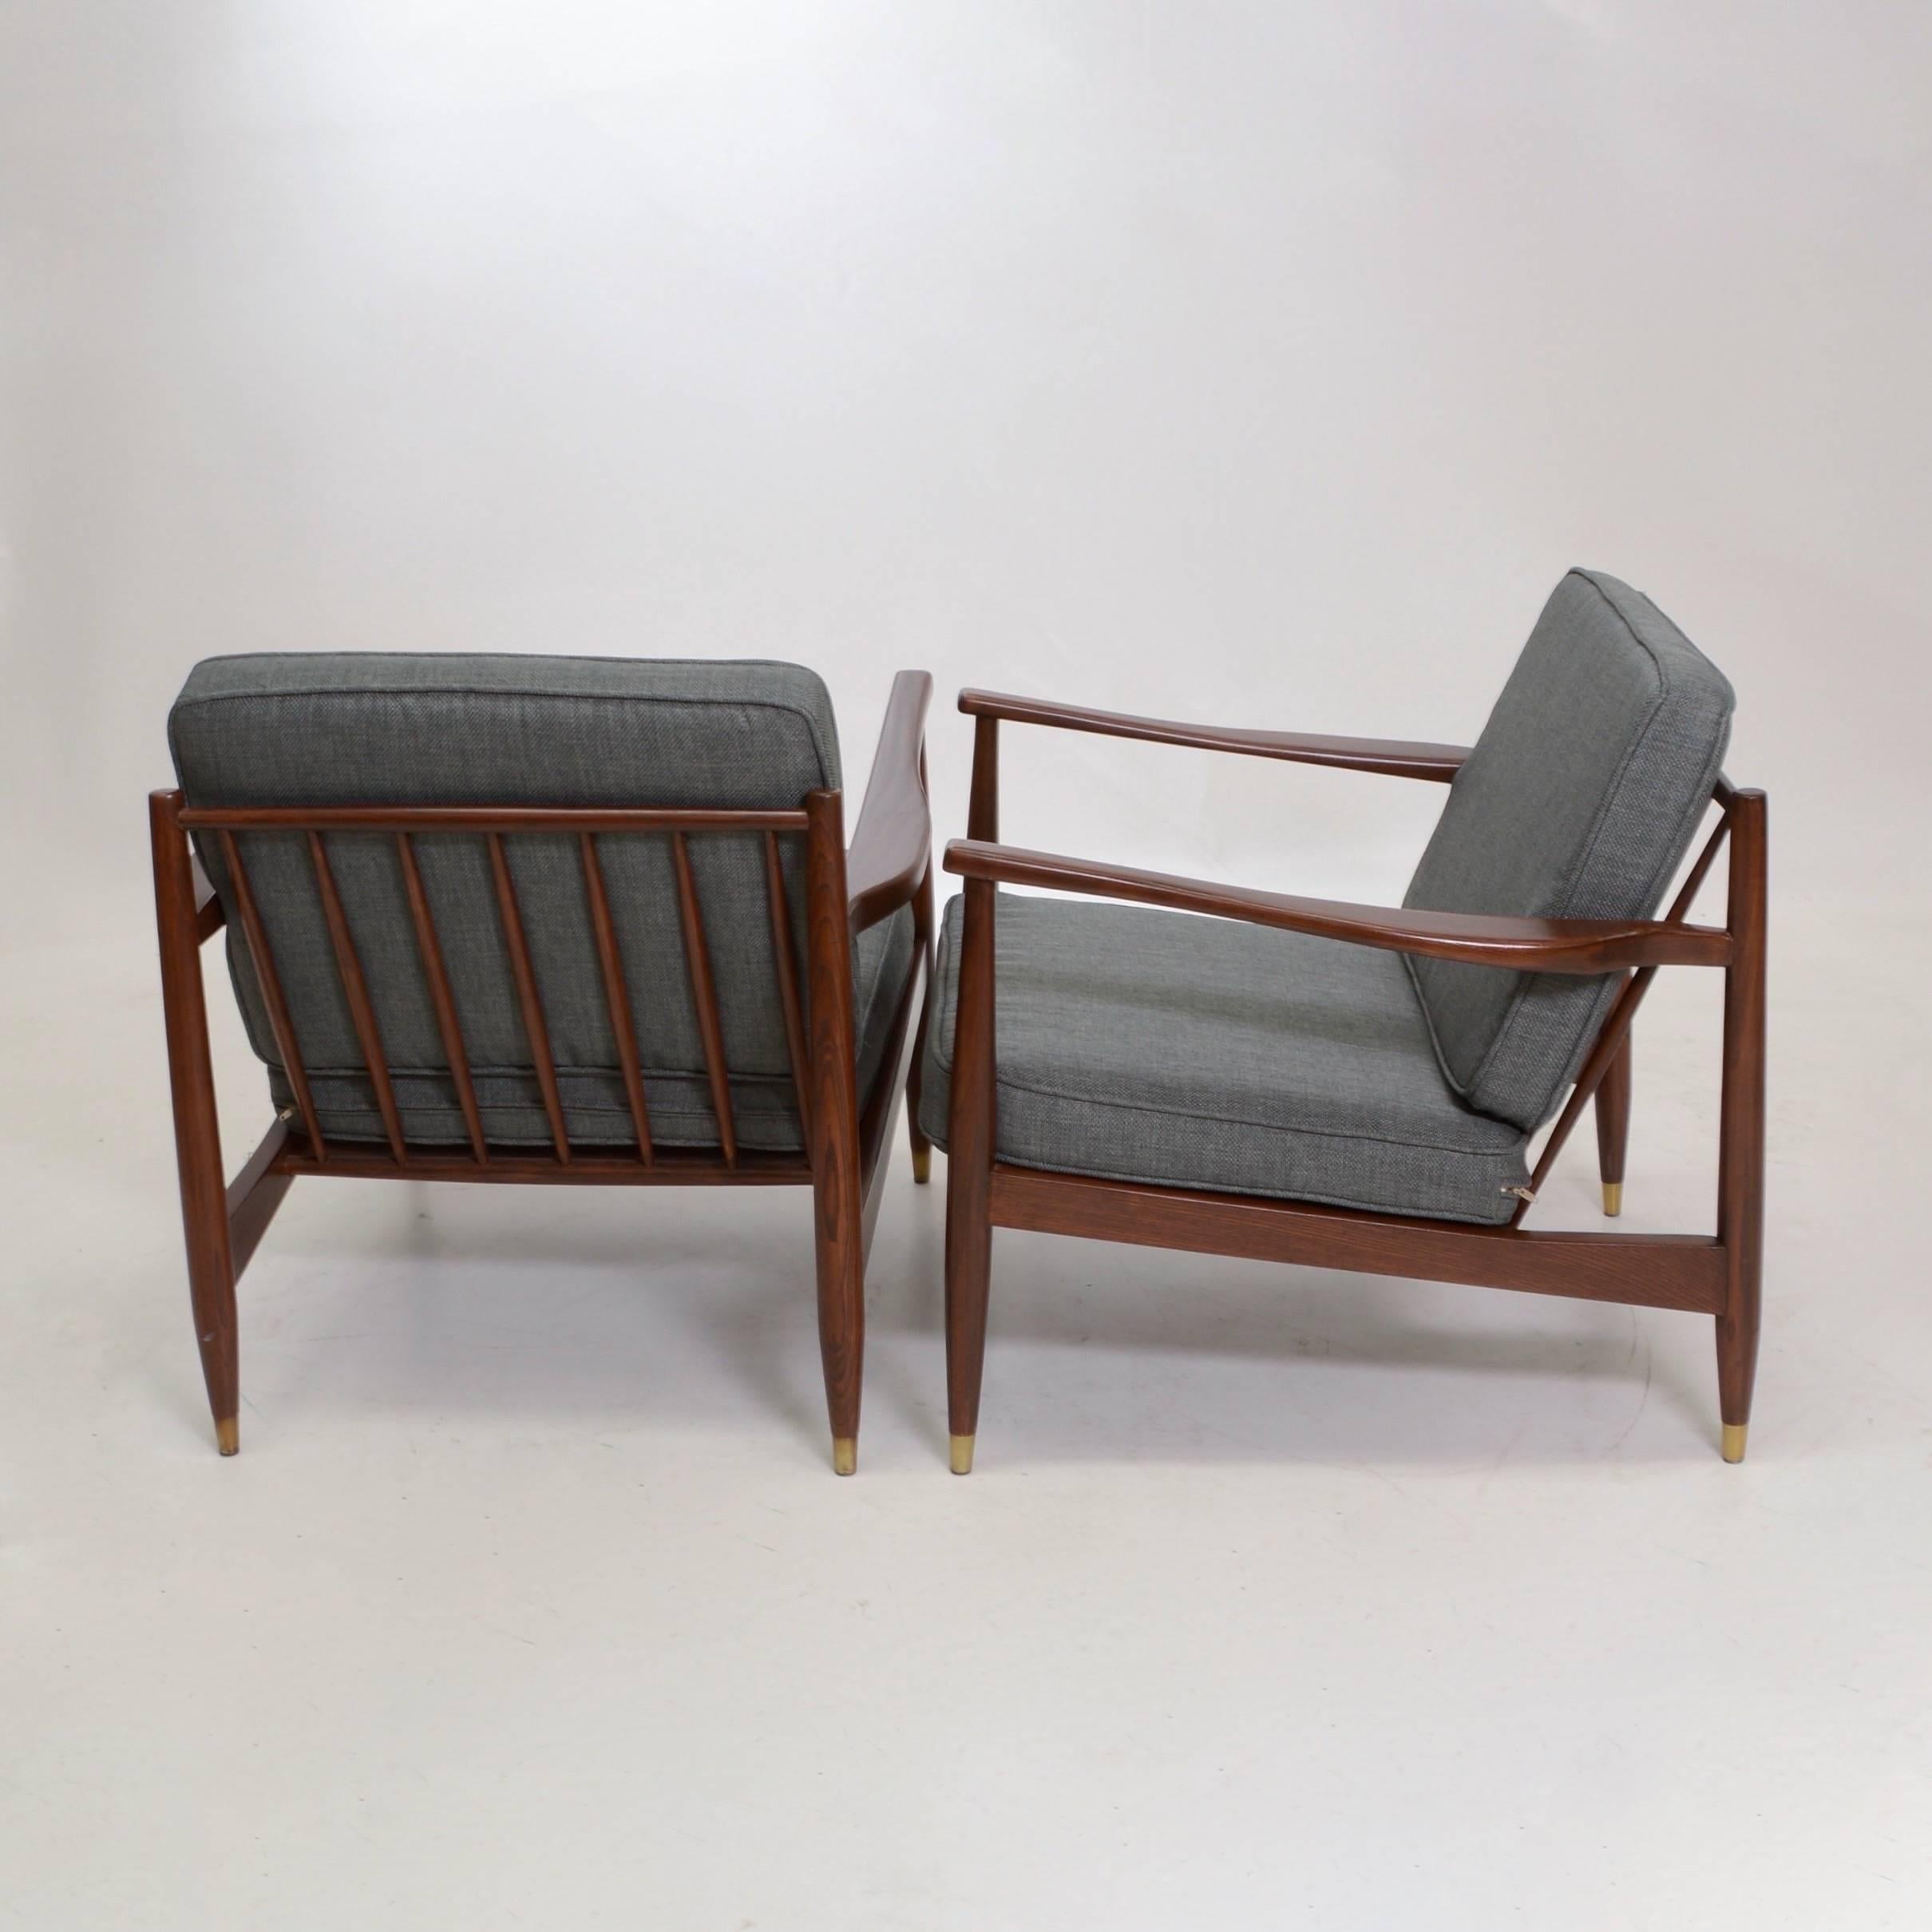 This is a newly restored pair of Mid-Century armchairs in the manner of Grete Jalk. This set includes two refinished chairs and four new cushions.